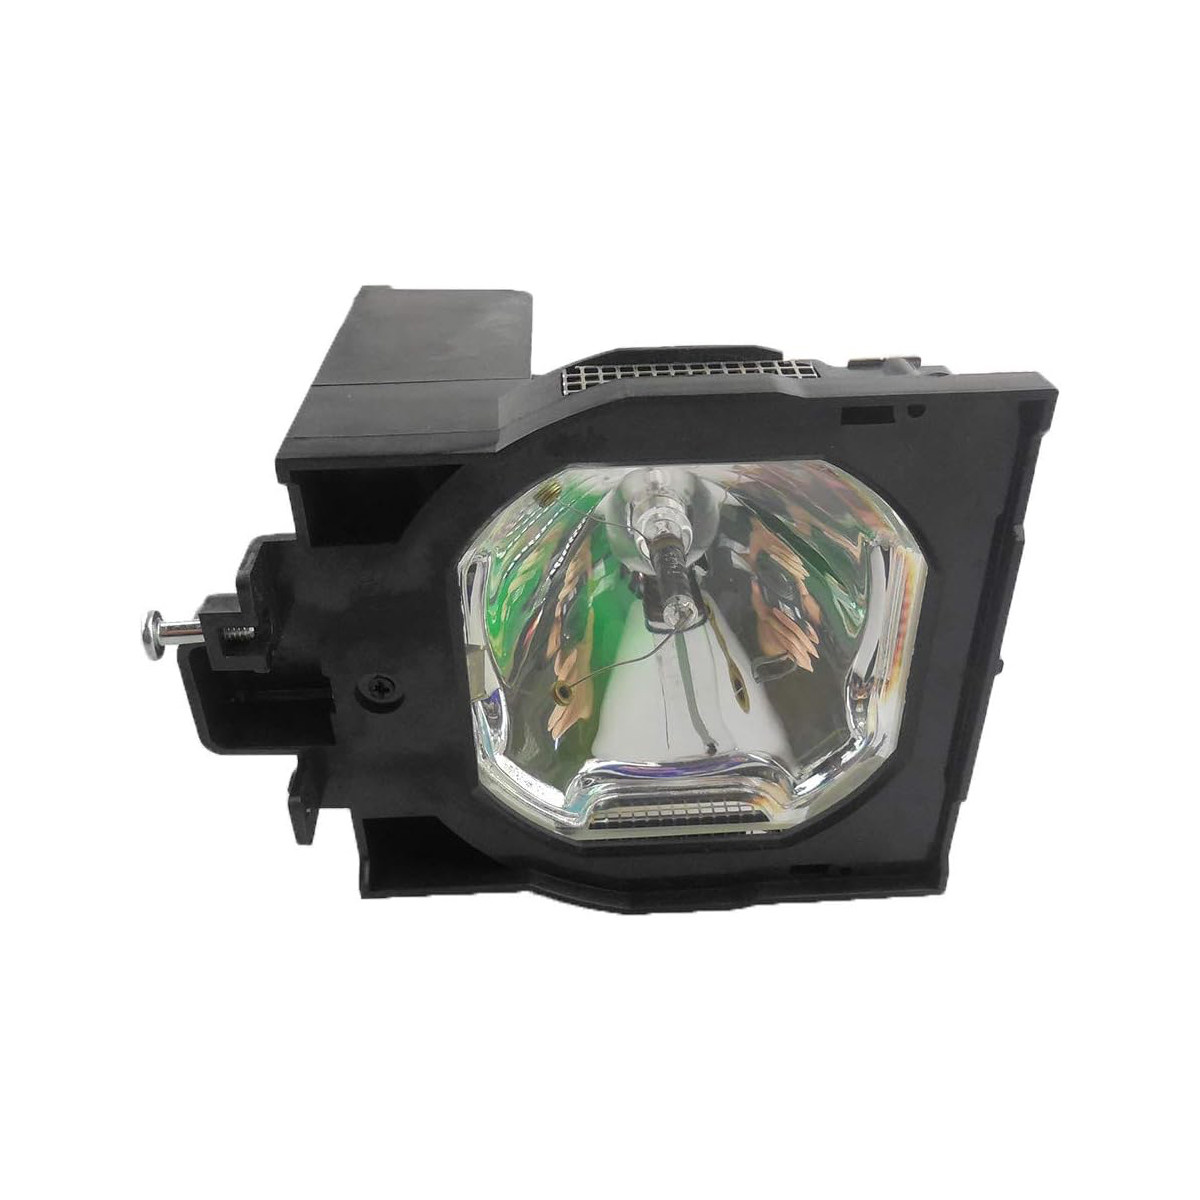 Replacement Projector lamp POA-LMP100 For Sanyo PL C-XF46 PL C-XF46E PLV-HD2000